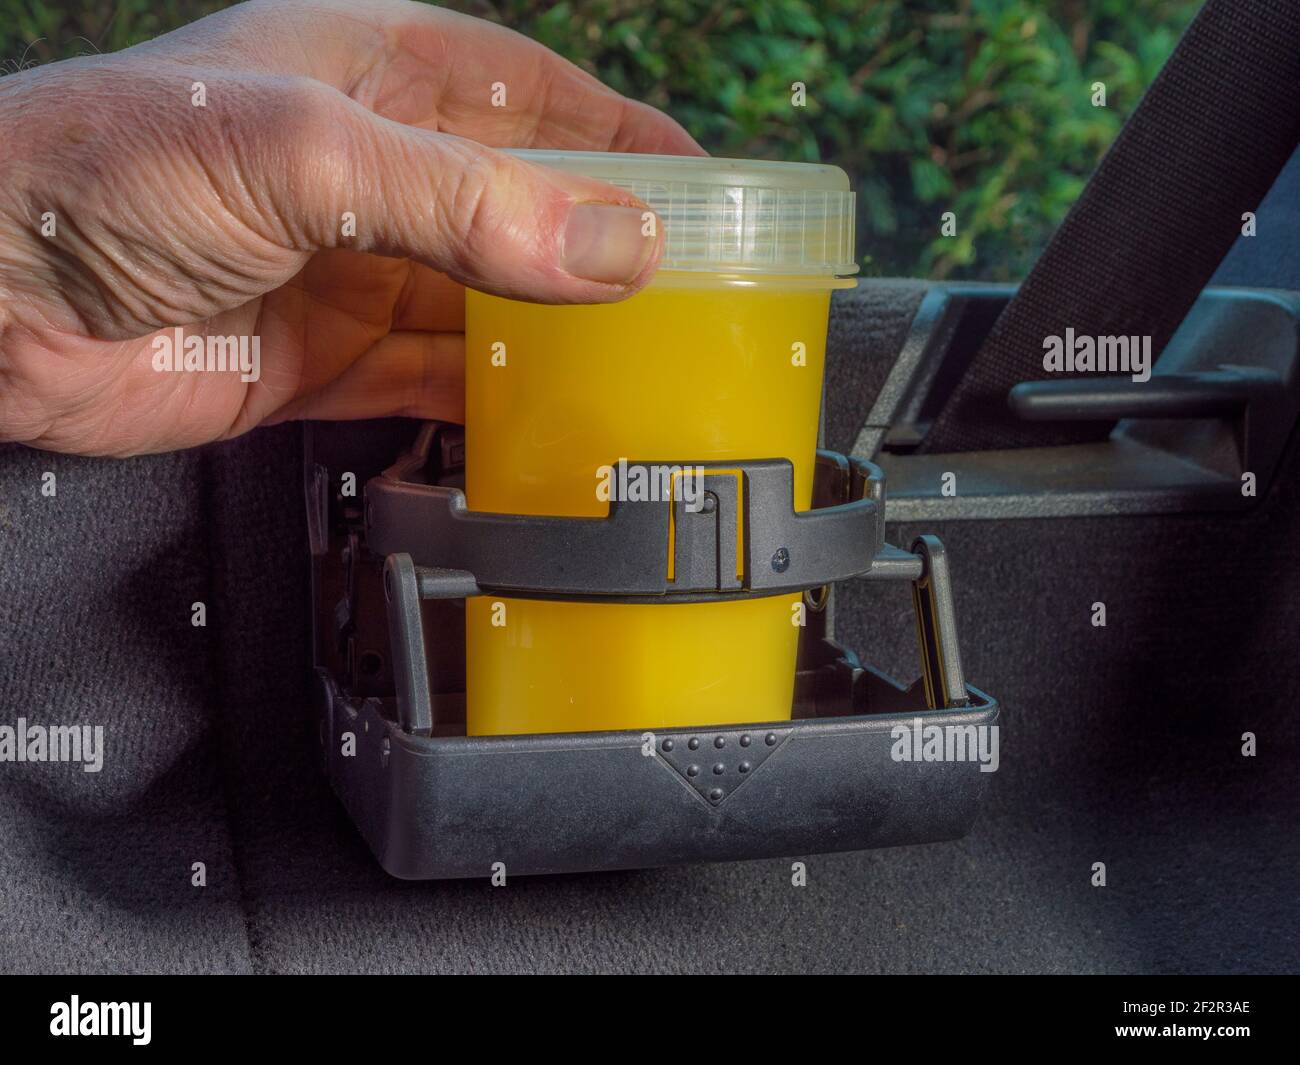 Closeup POV shot of a man’s hand holding a plastic container with a cold orange juice drink inside, standing in a foldaway cupholder in a vehicle. Stock Photo